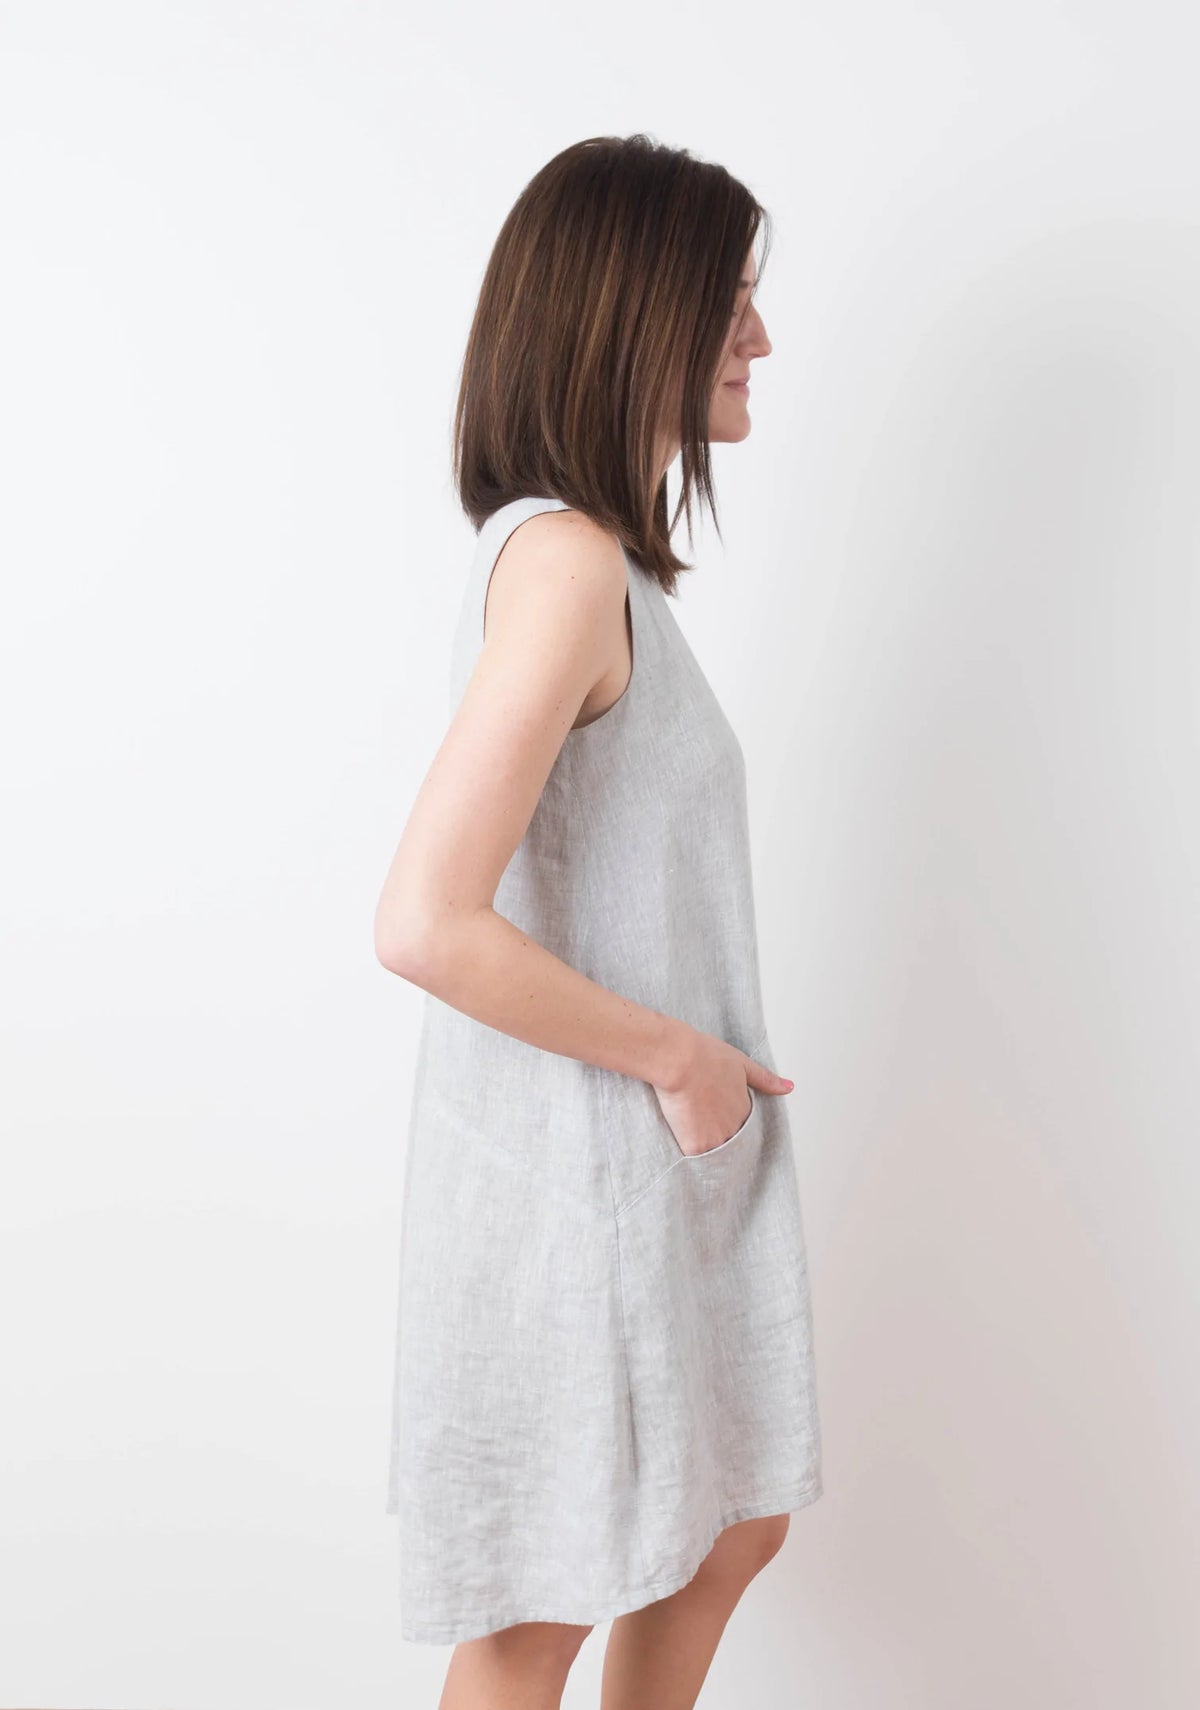 Model Kari is wearing a size 6 Farrow in a light colored linen fabric, side view sleeveless with pockets.